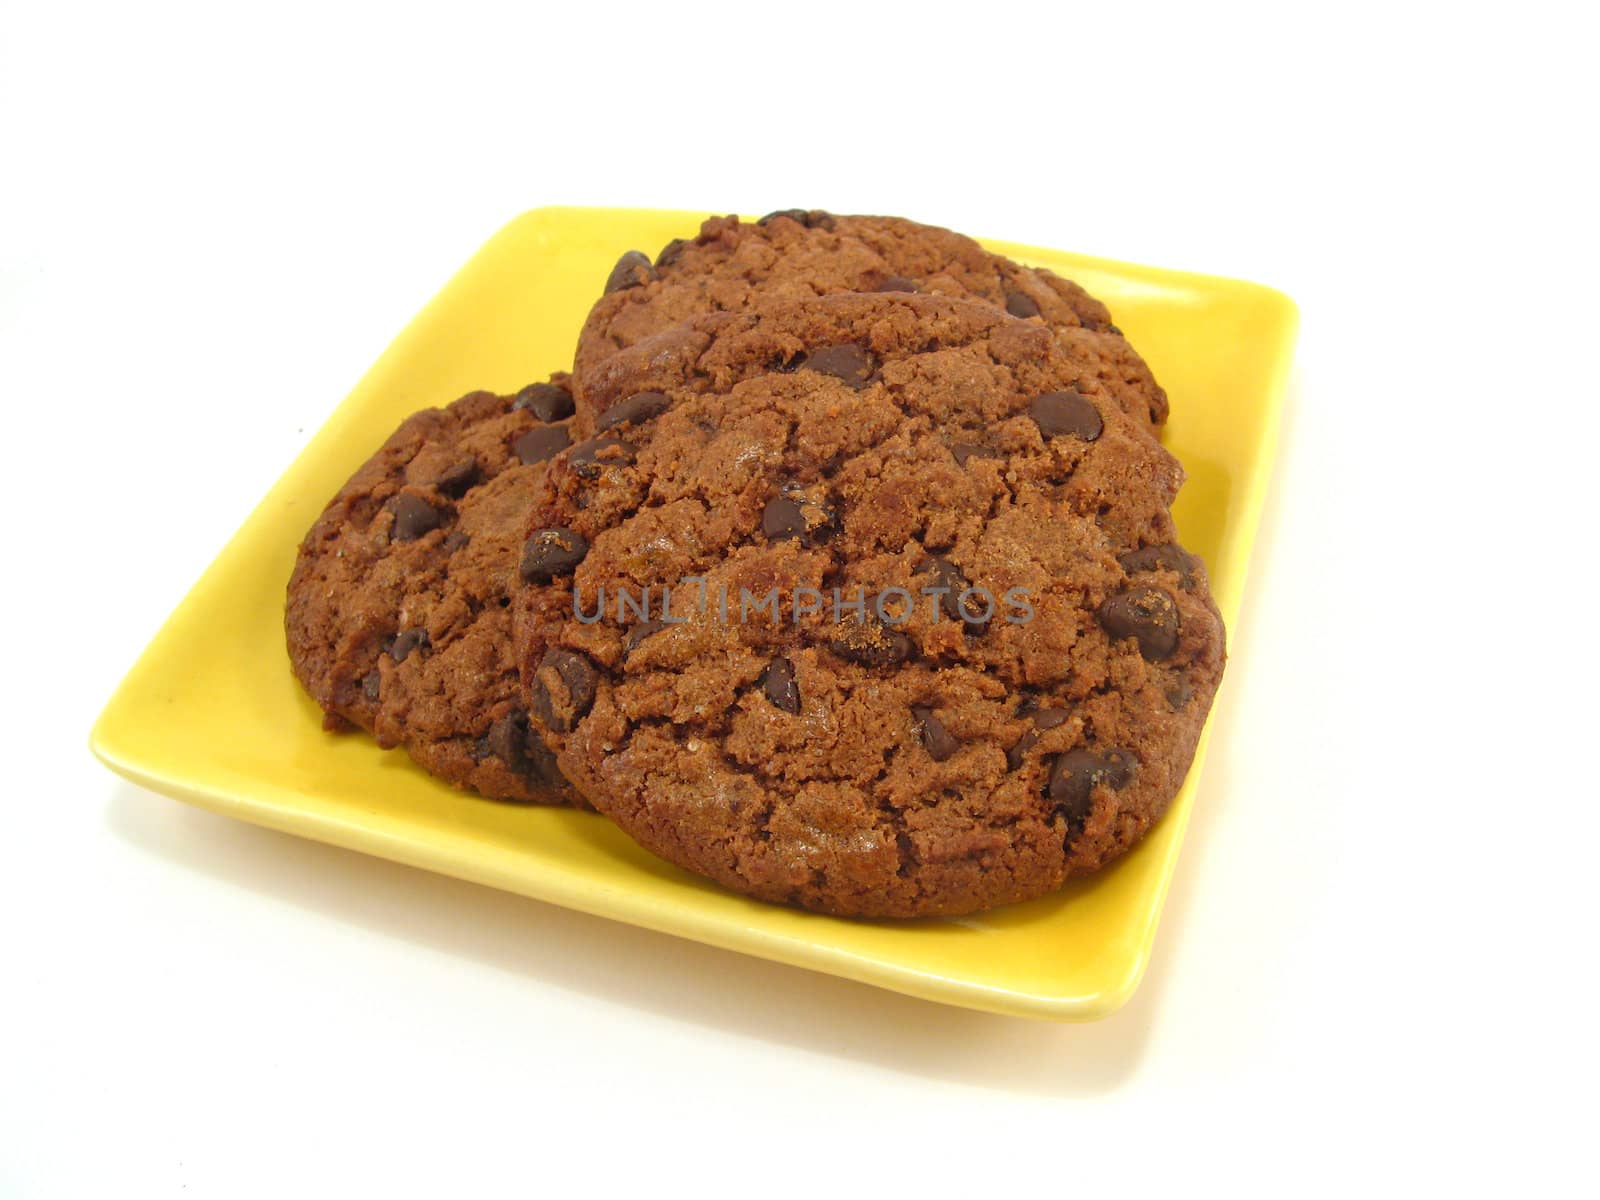 some chocolate cookies on a yellow plate over a white background